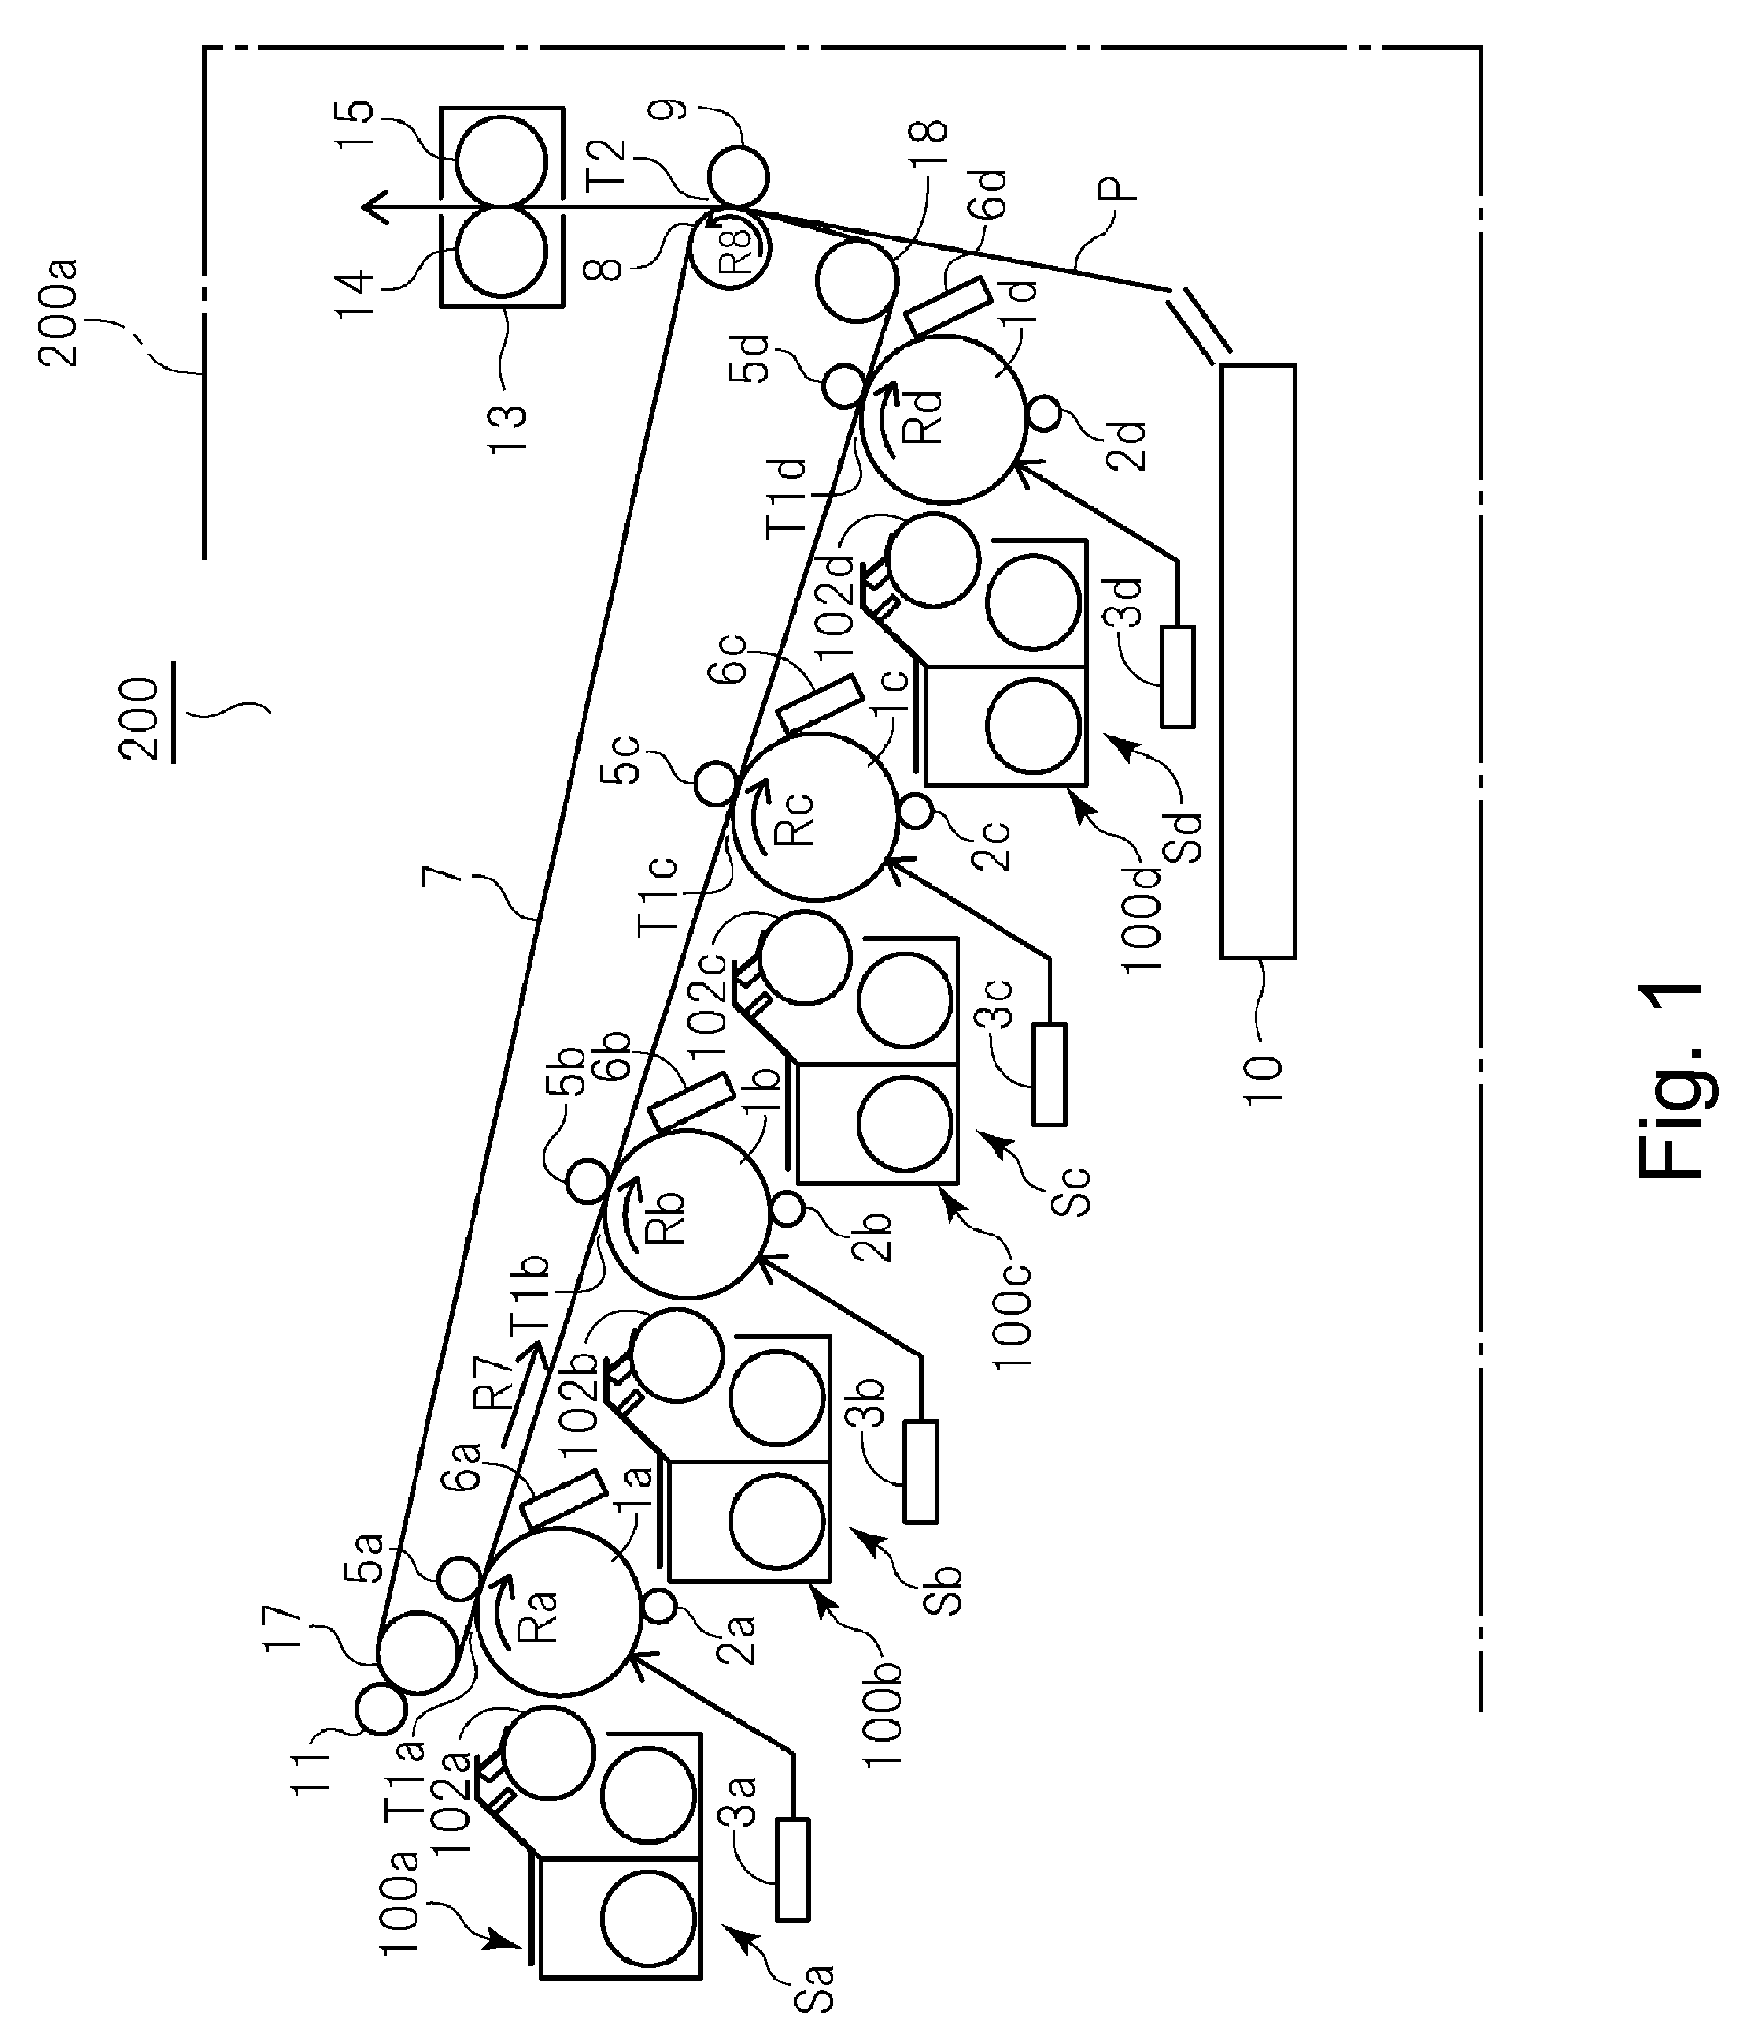 Image forming apparatus with adjusting belt unit